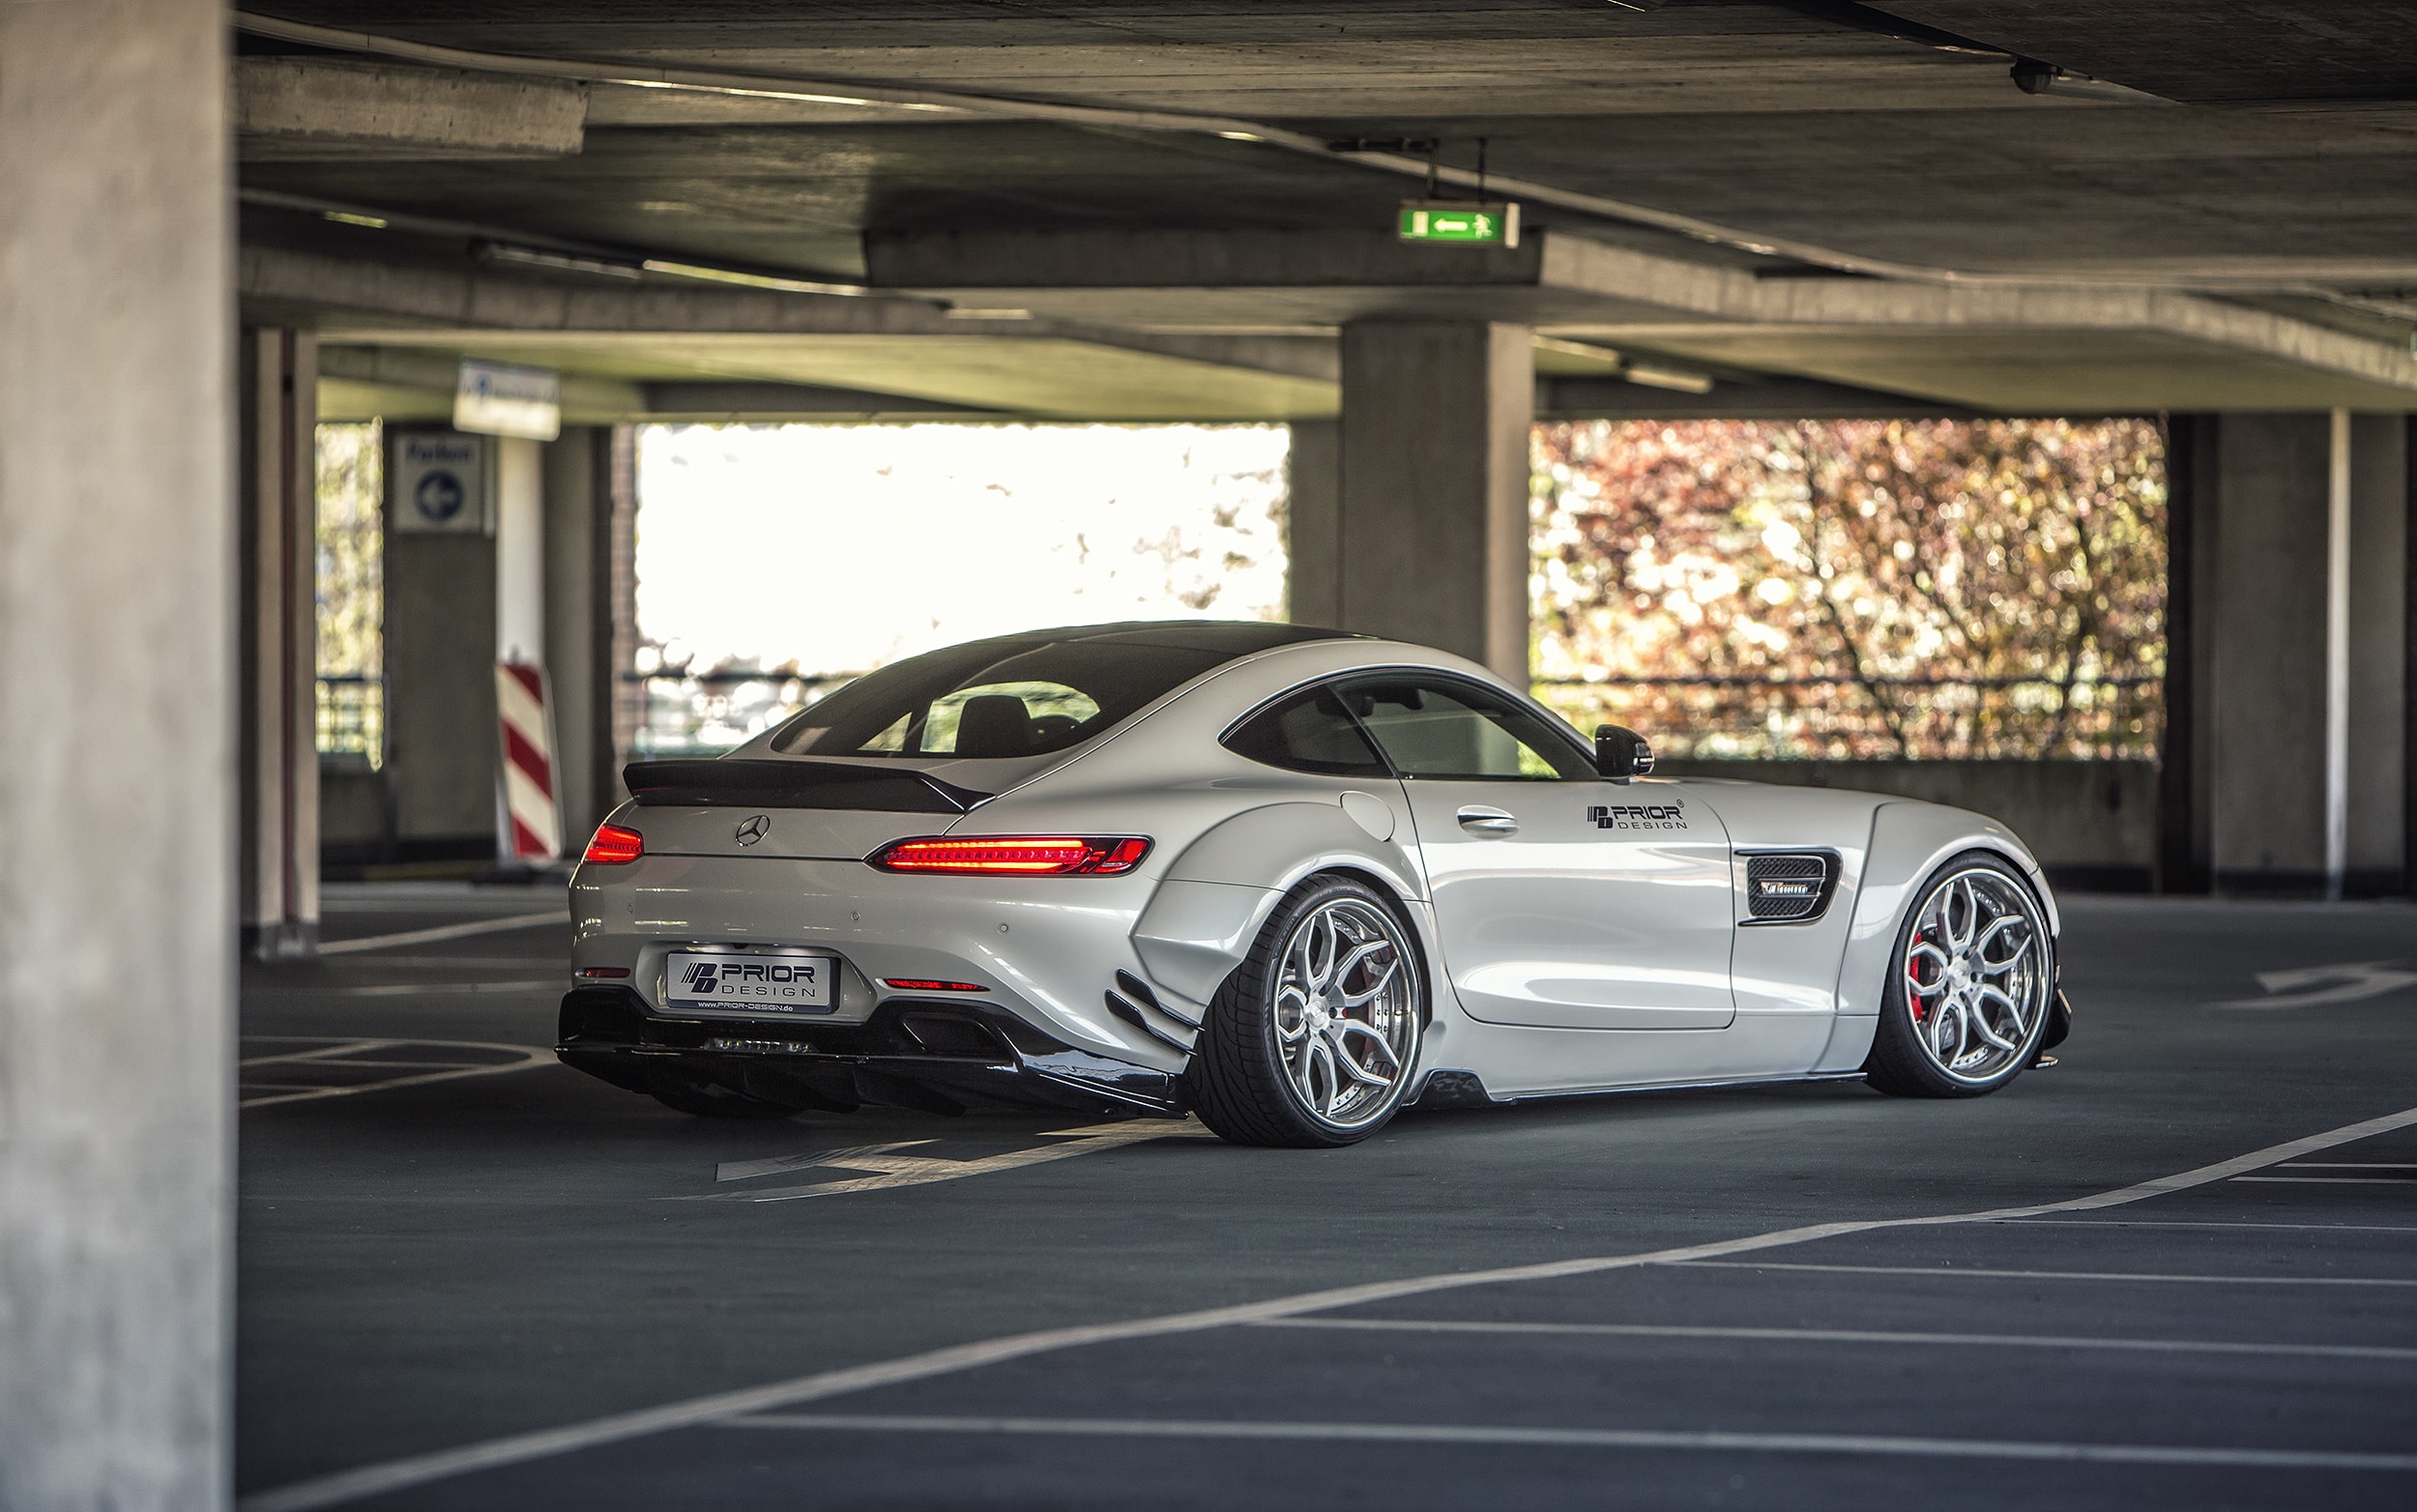 PD800GT Diffusor for Mercedes GT:GTS - PD800GT Widebody Aerodynamic Kit - Prior Design